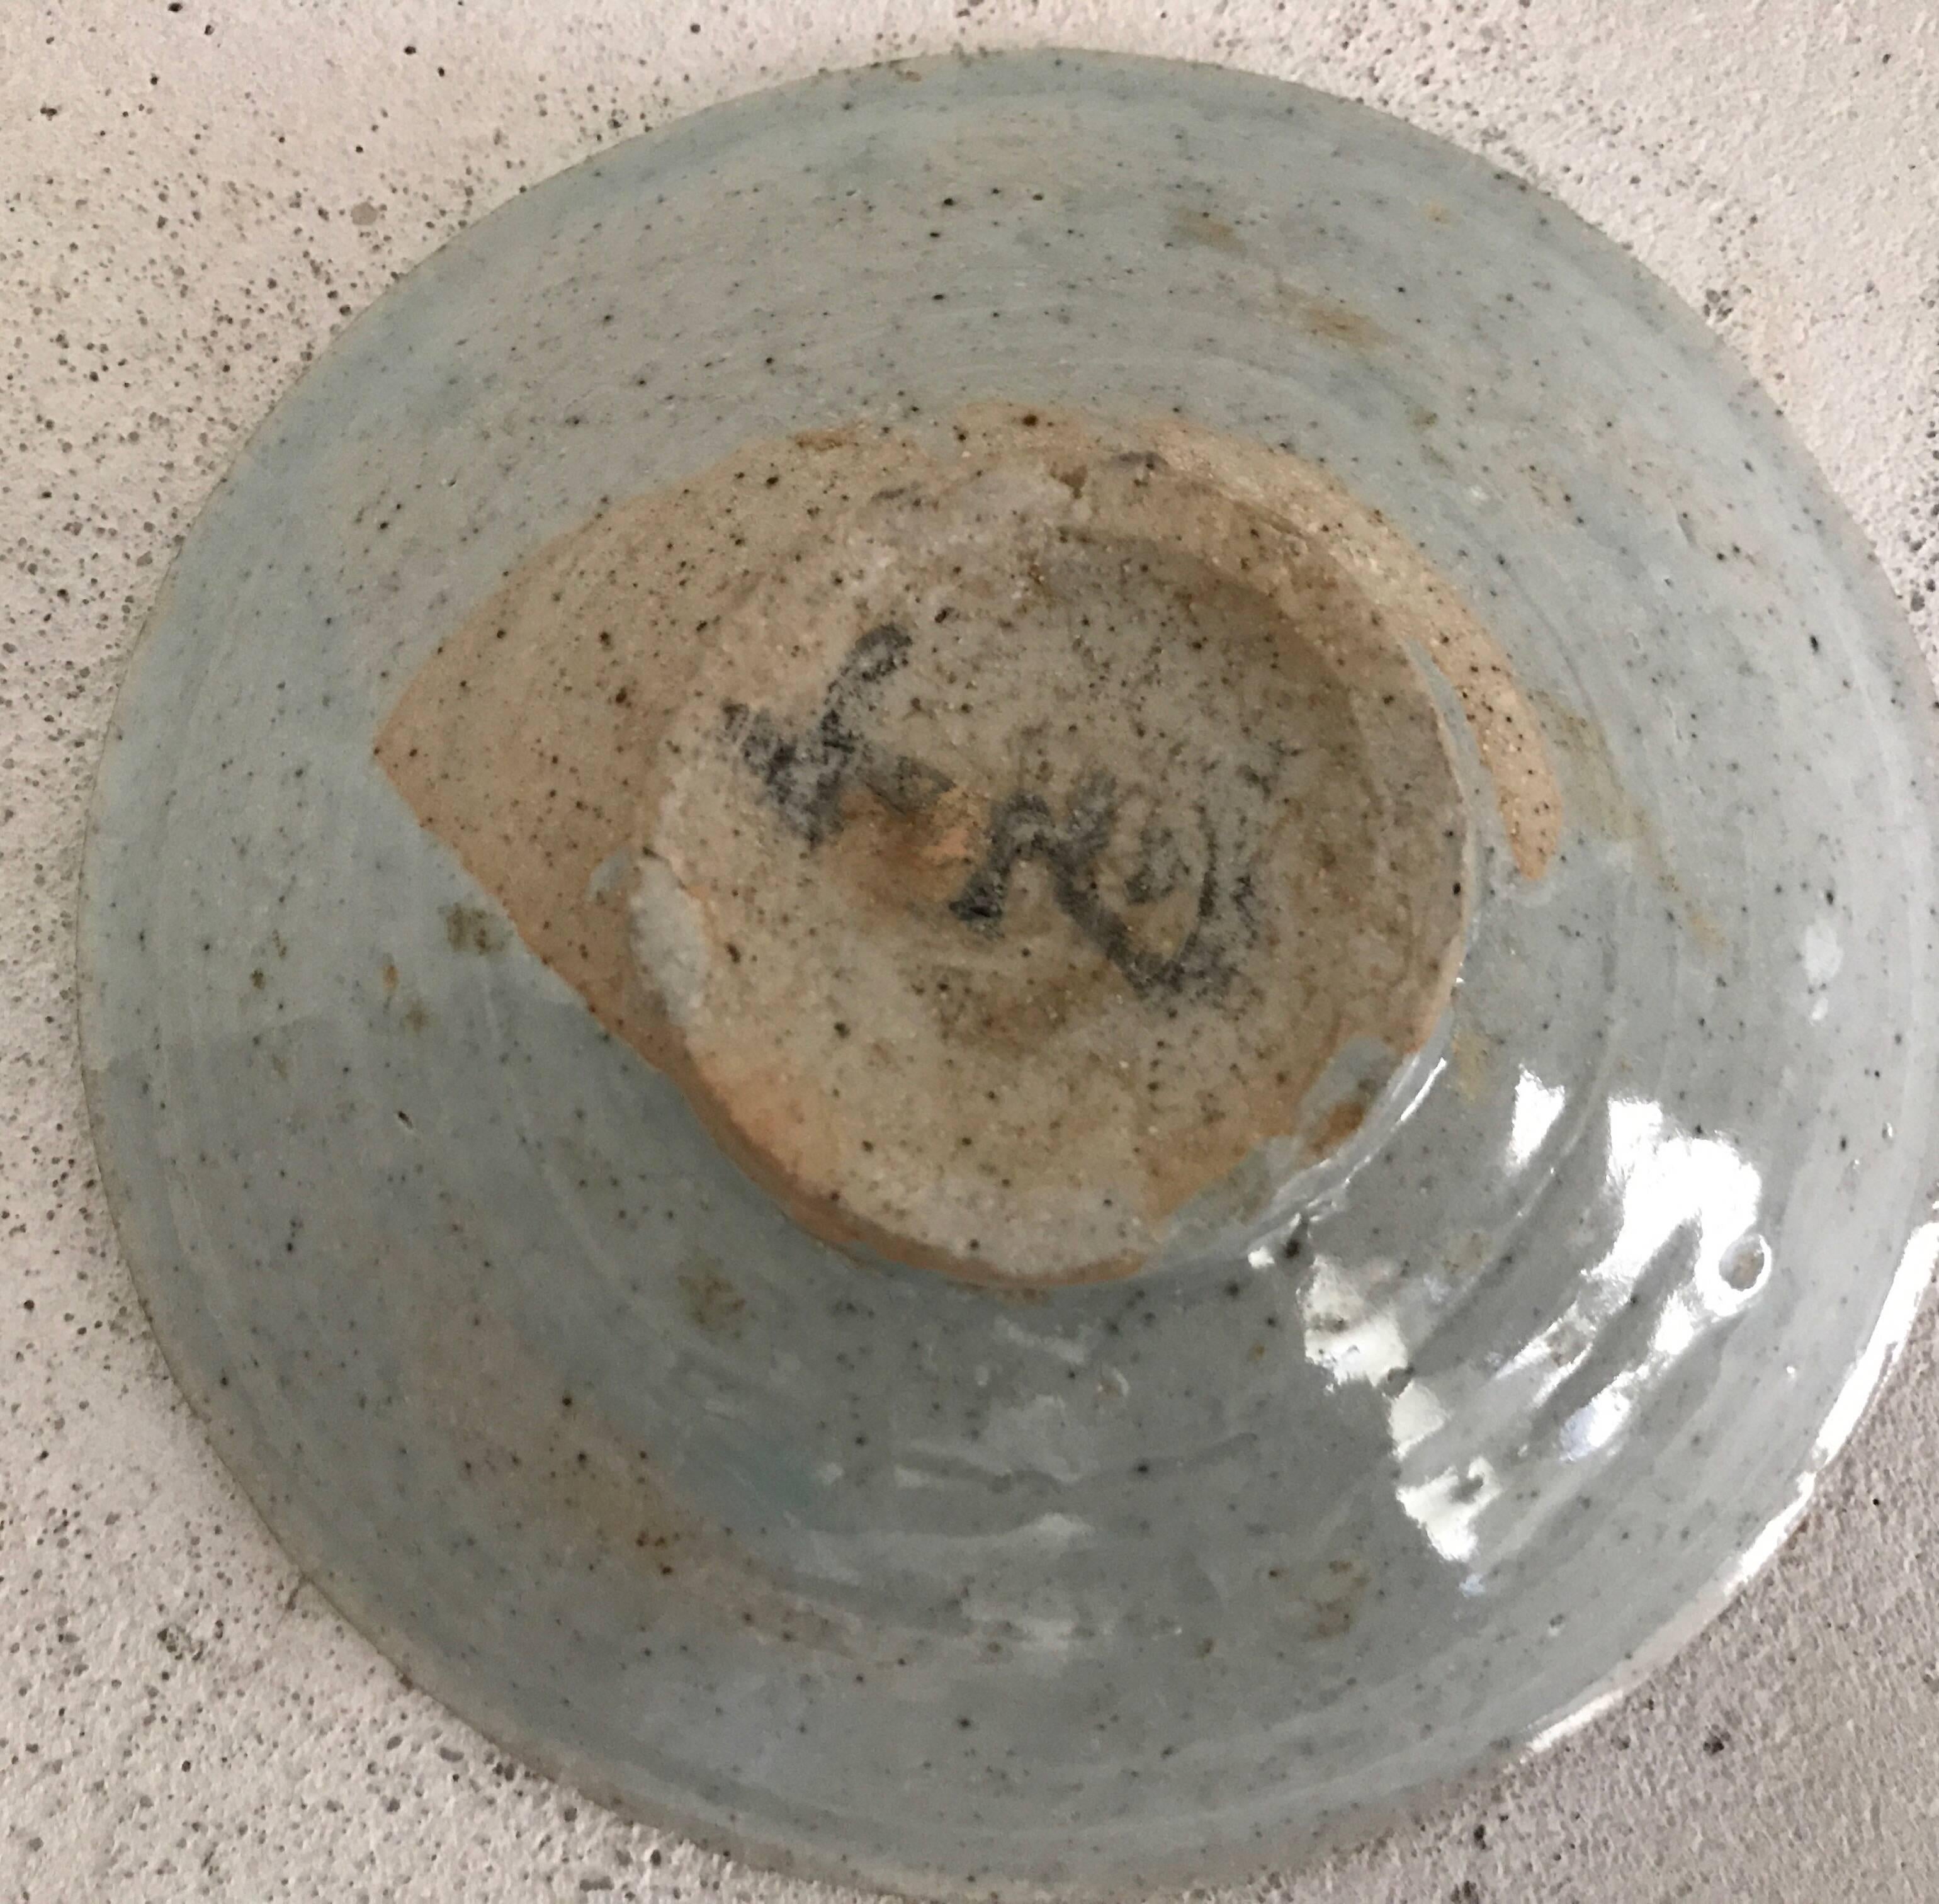 17th Century Japanese Porcelain Plate found in Tokyo, Japan  1